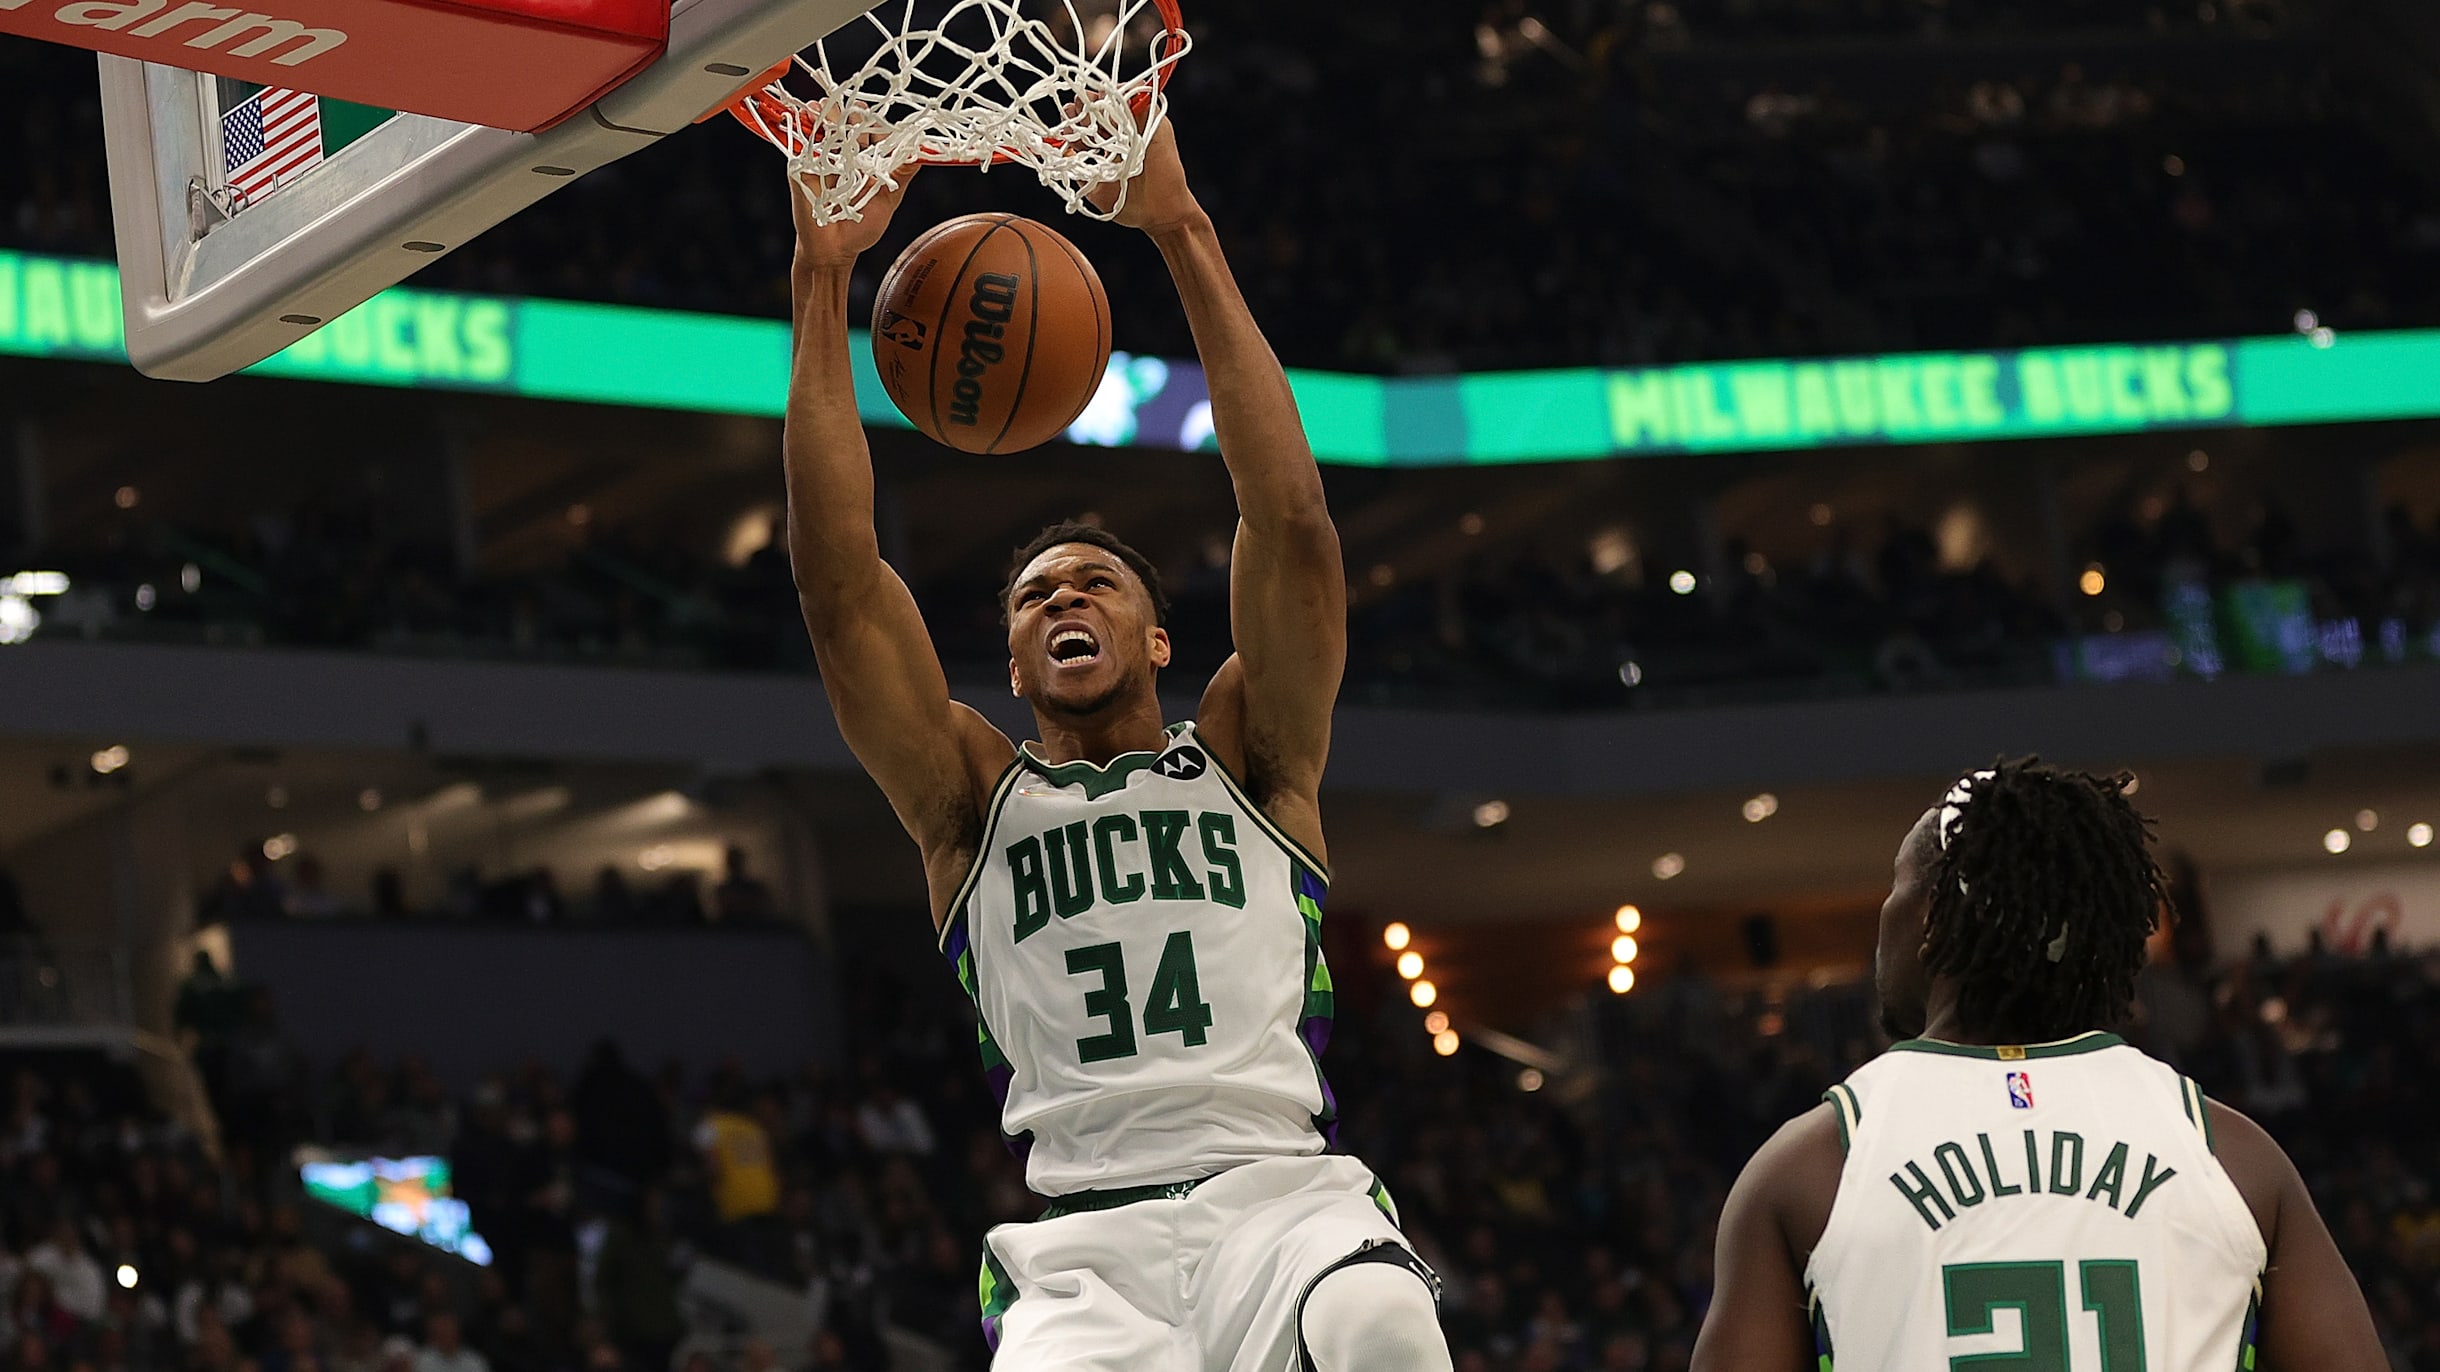 Olympic basketball: Giannis Antetokounmpo asserts his dominance in NBA